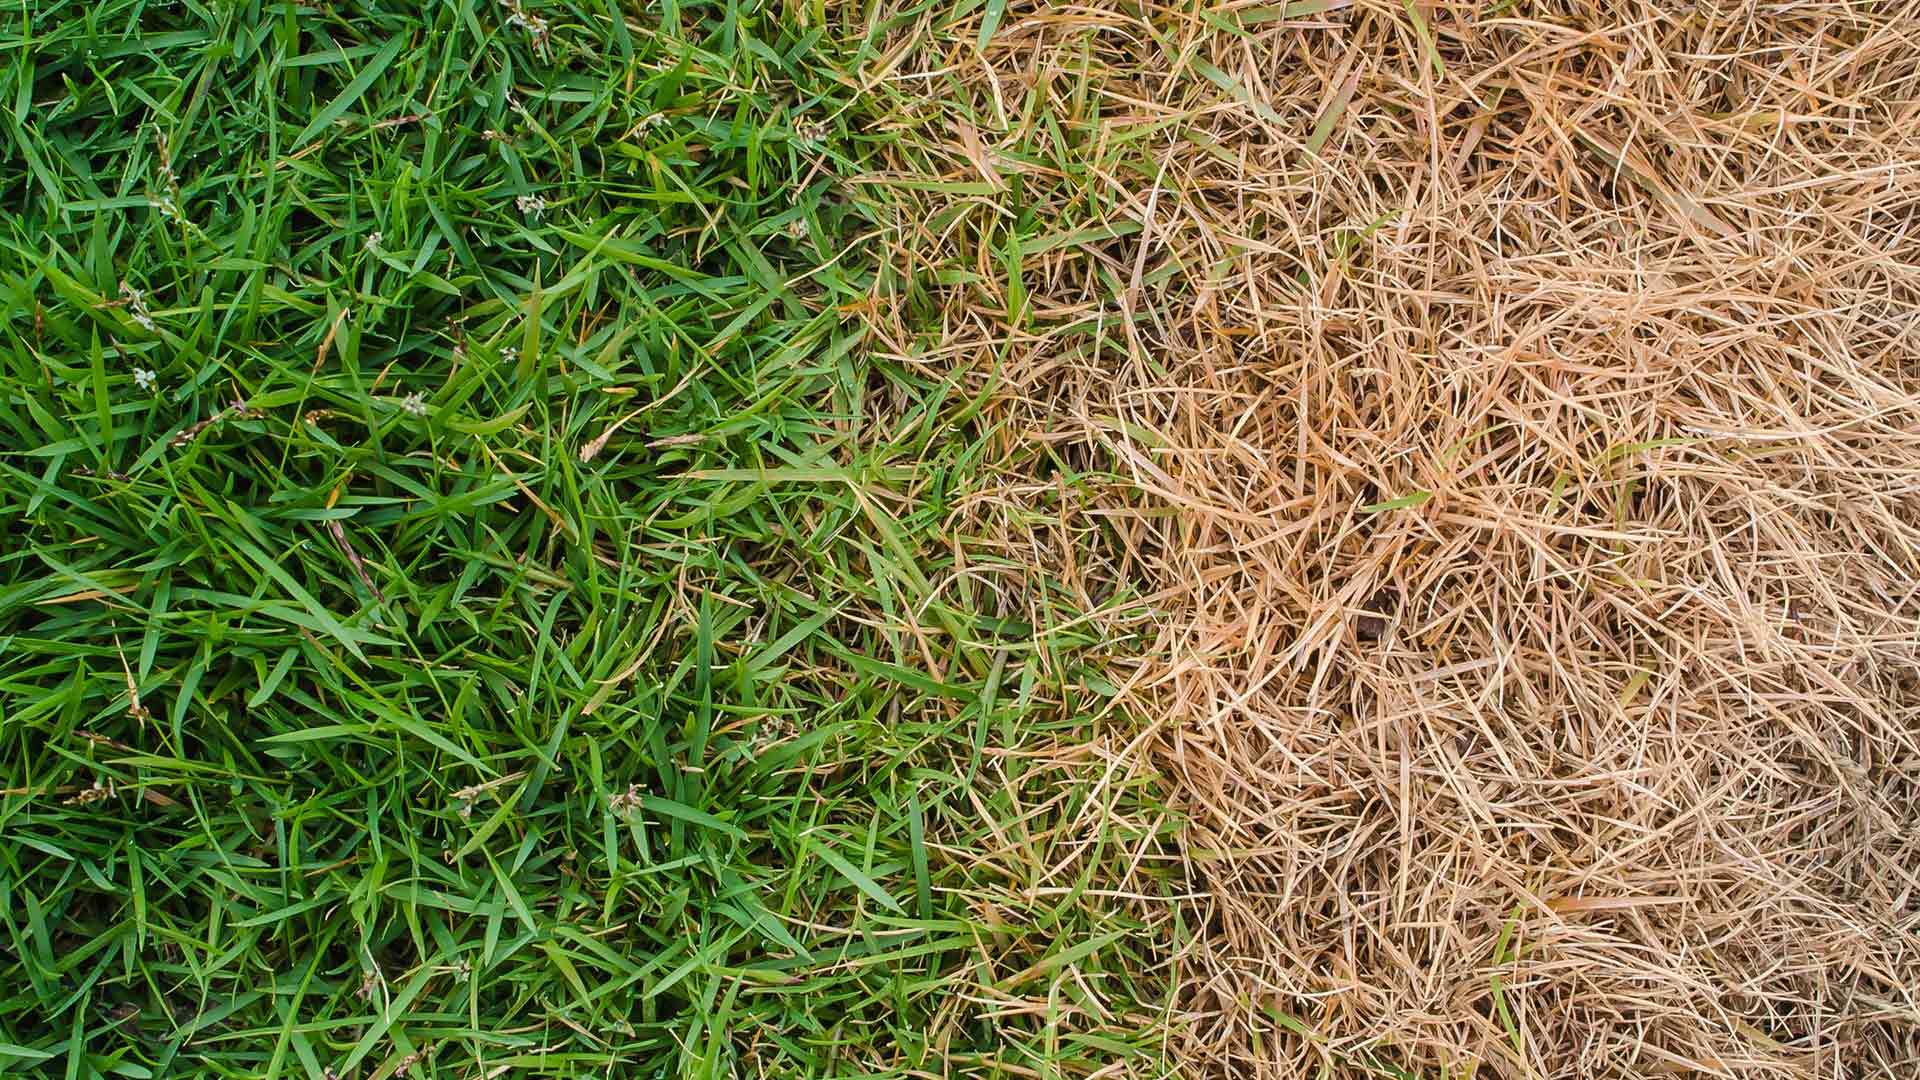 Fertilization & Weed Control - Two Services That Should Always Be Combined